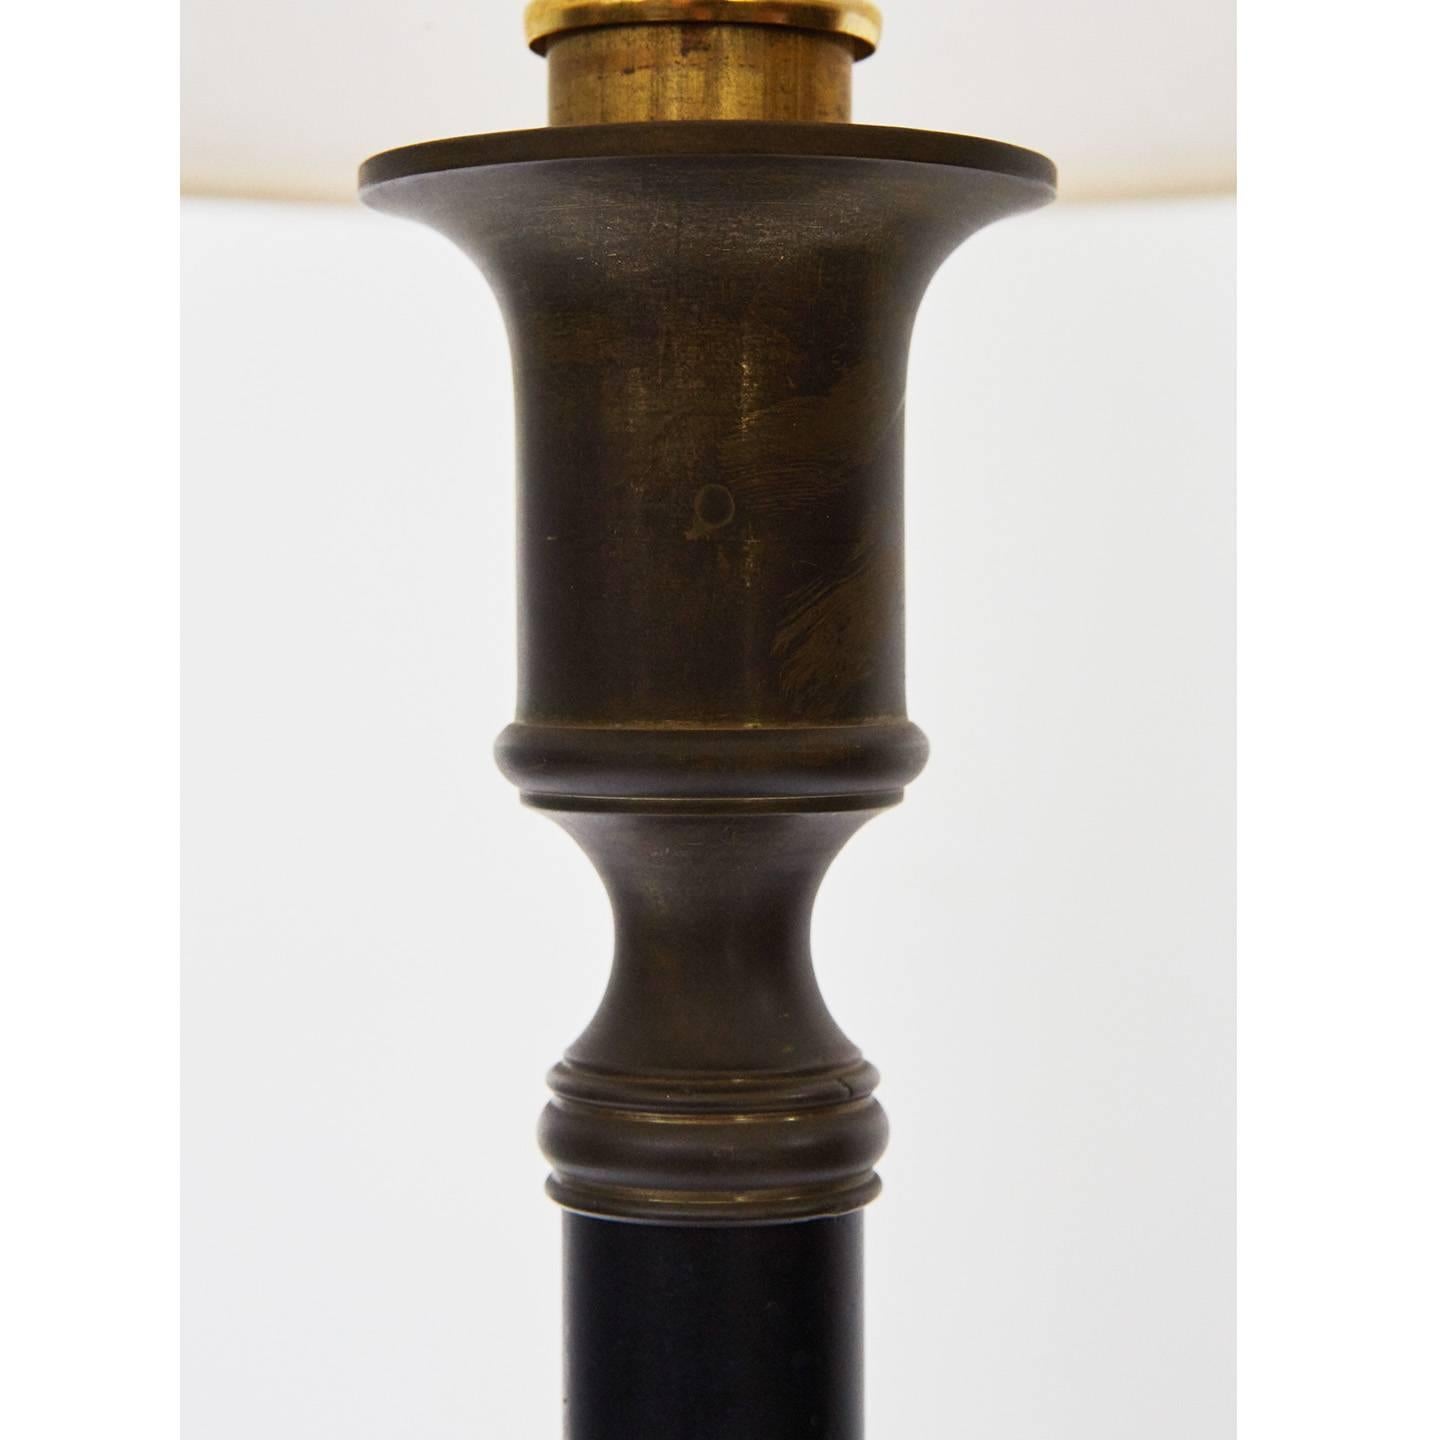 These distinguished lamps are made of metal on wooden bases with natural patina and signs of age and wear. The pair are of a nice size, well-proportioned and of a nice height. The lamps have been recently re-wired and are ready for use. These lamps